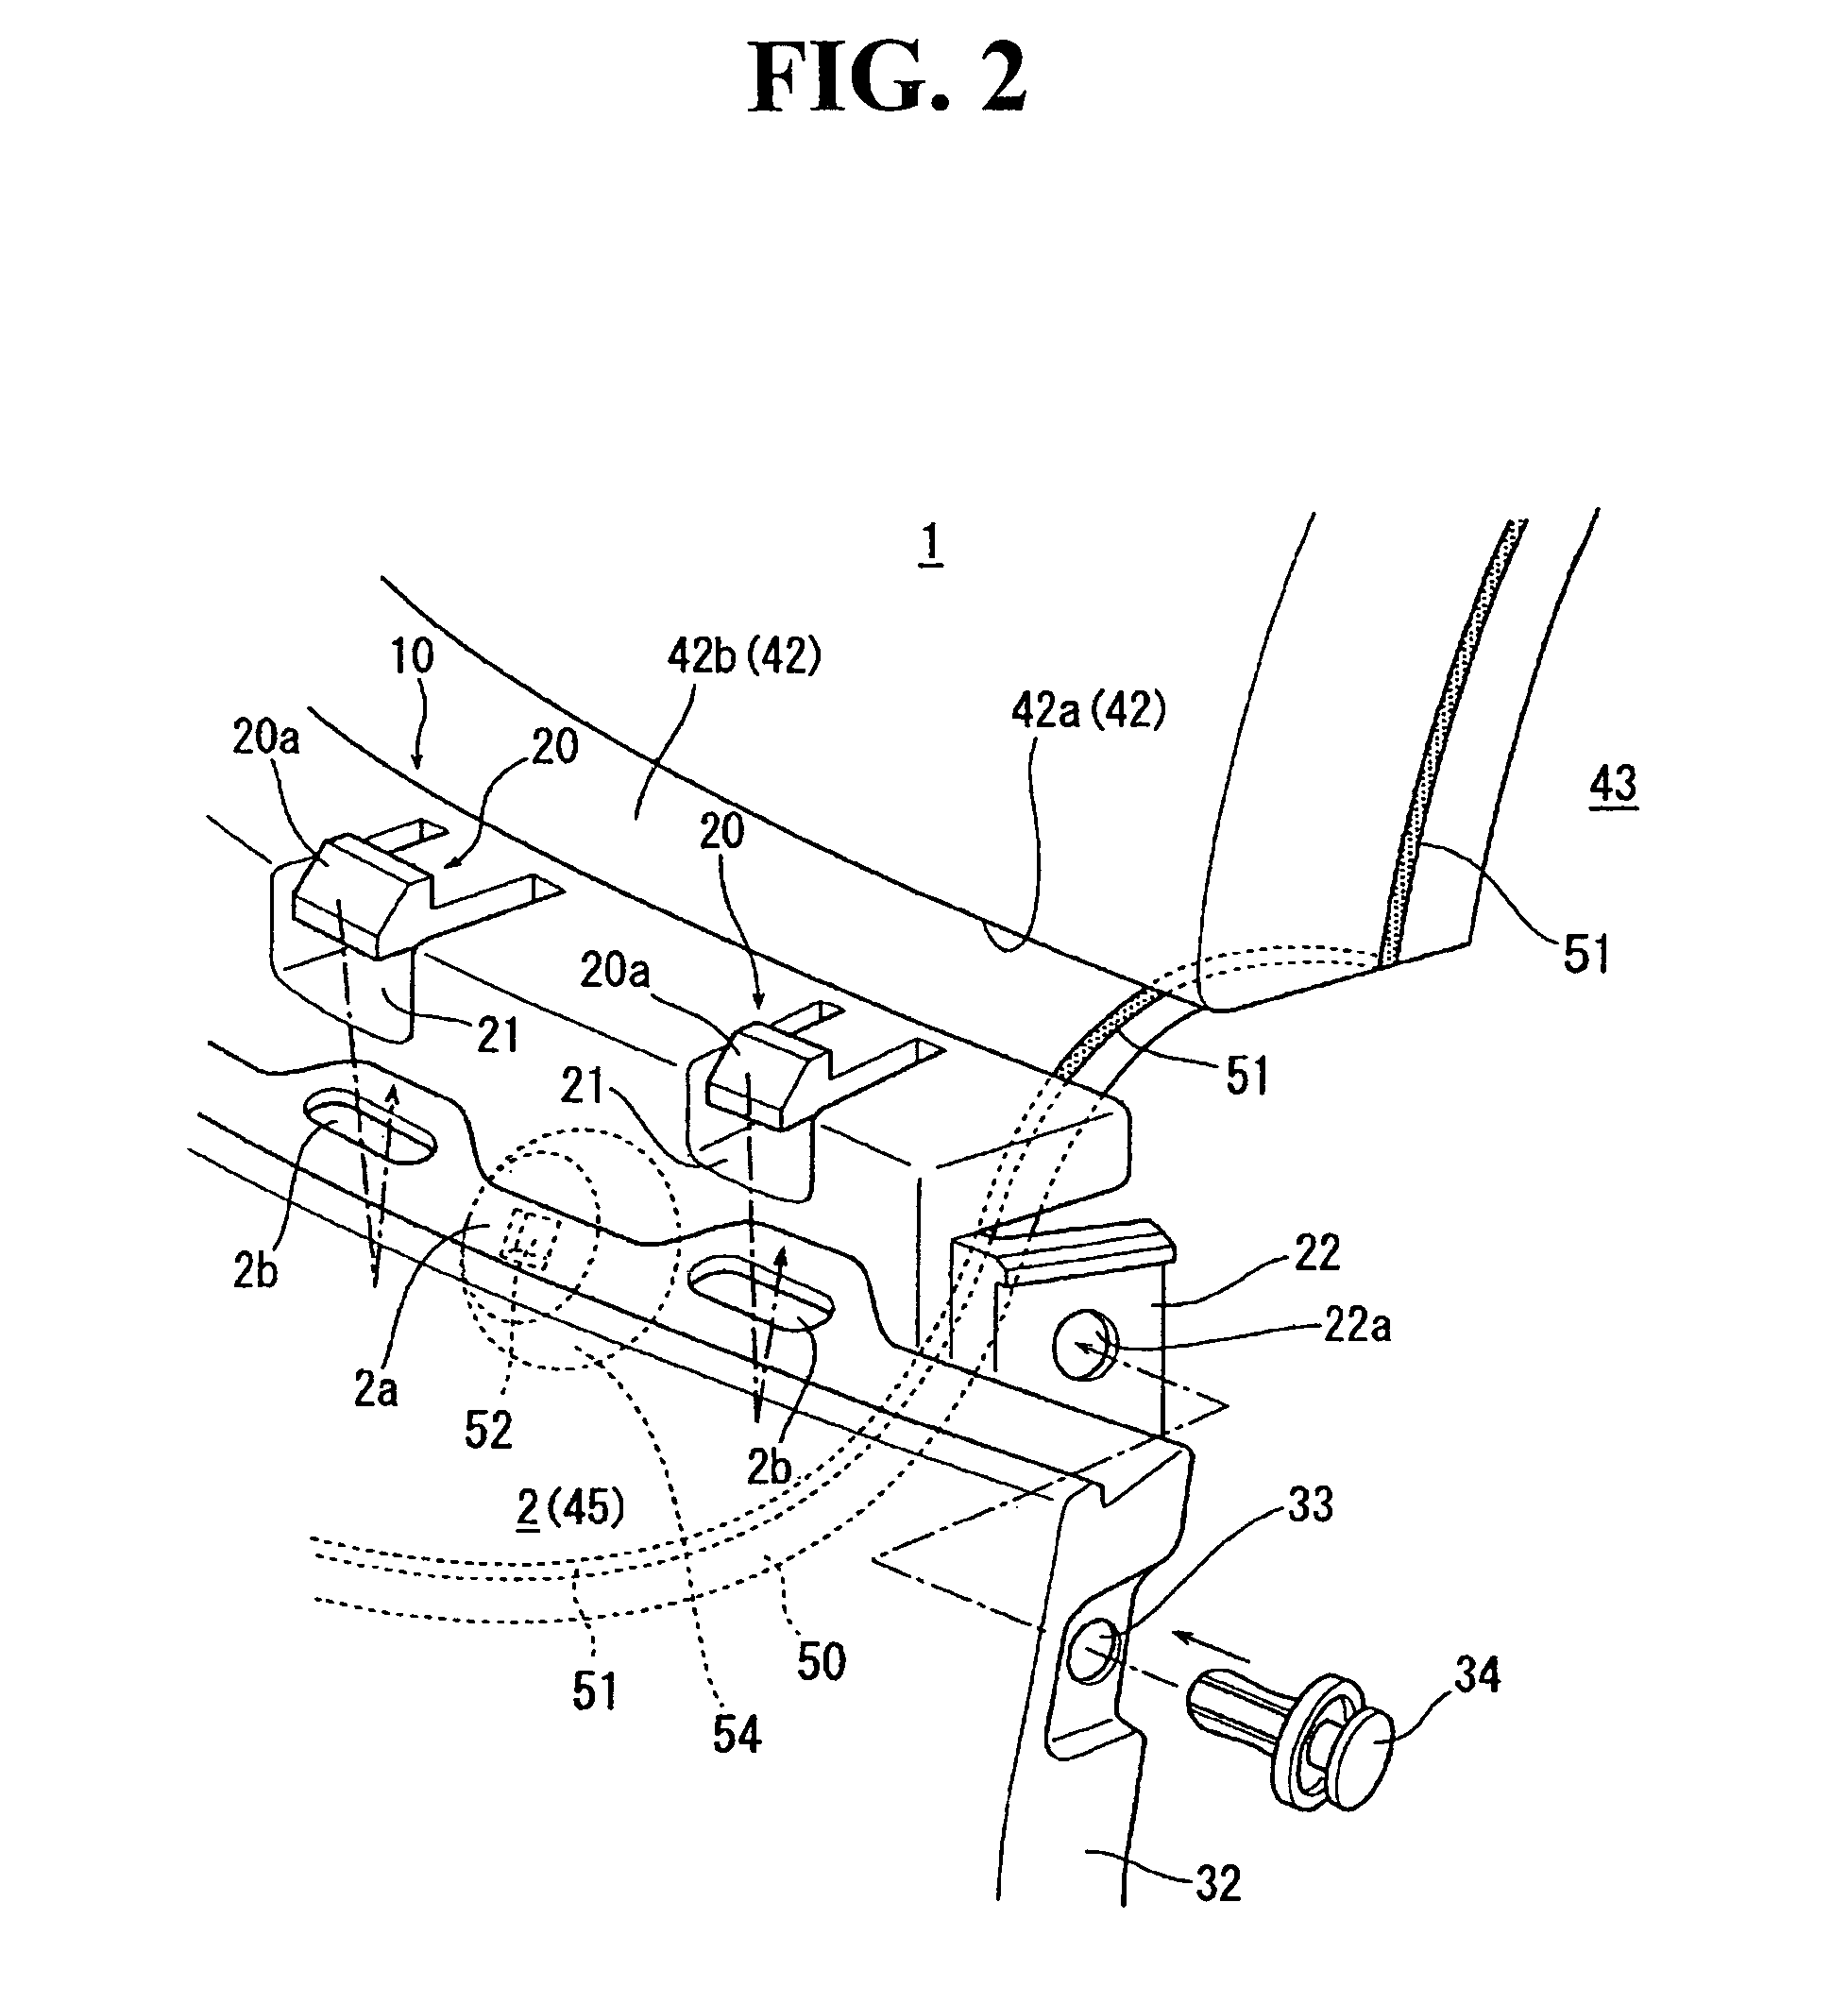 Bumper fixture, and bumper mounting structure